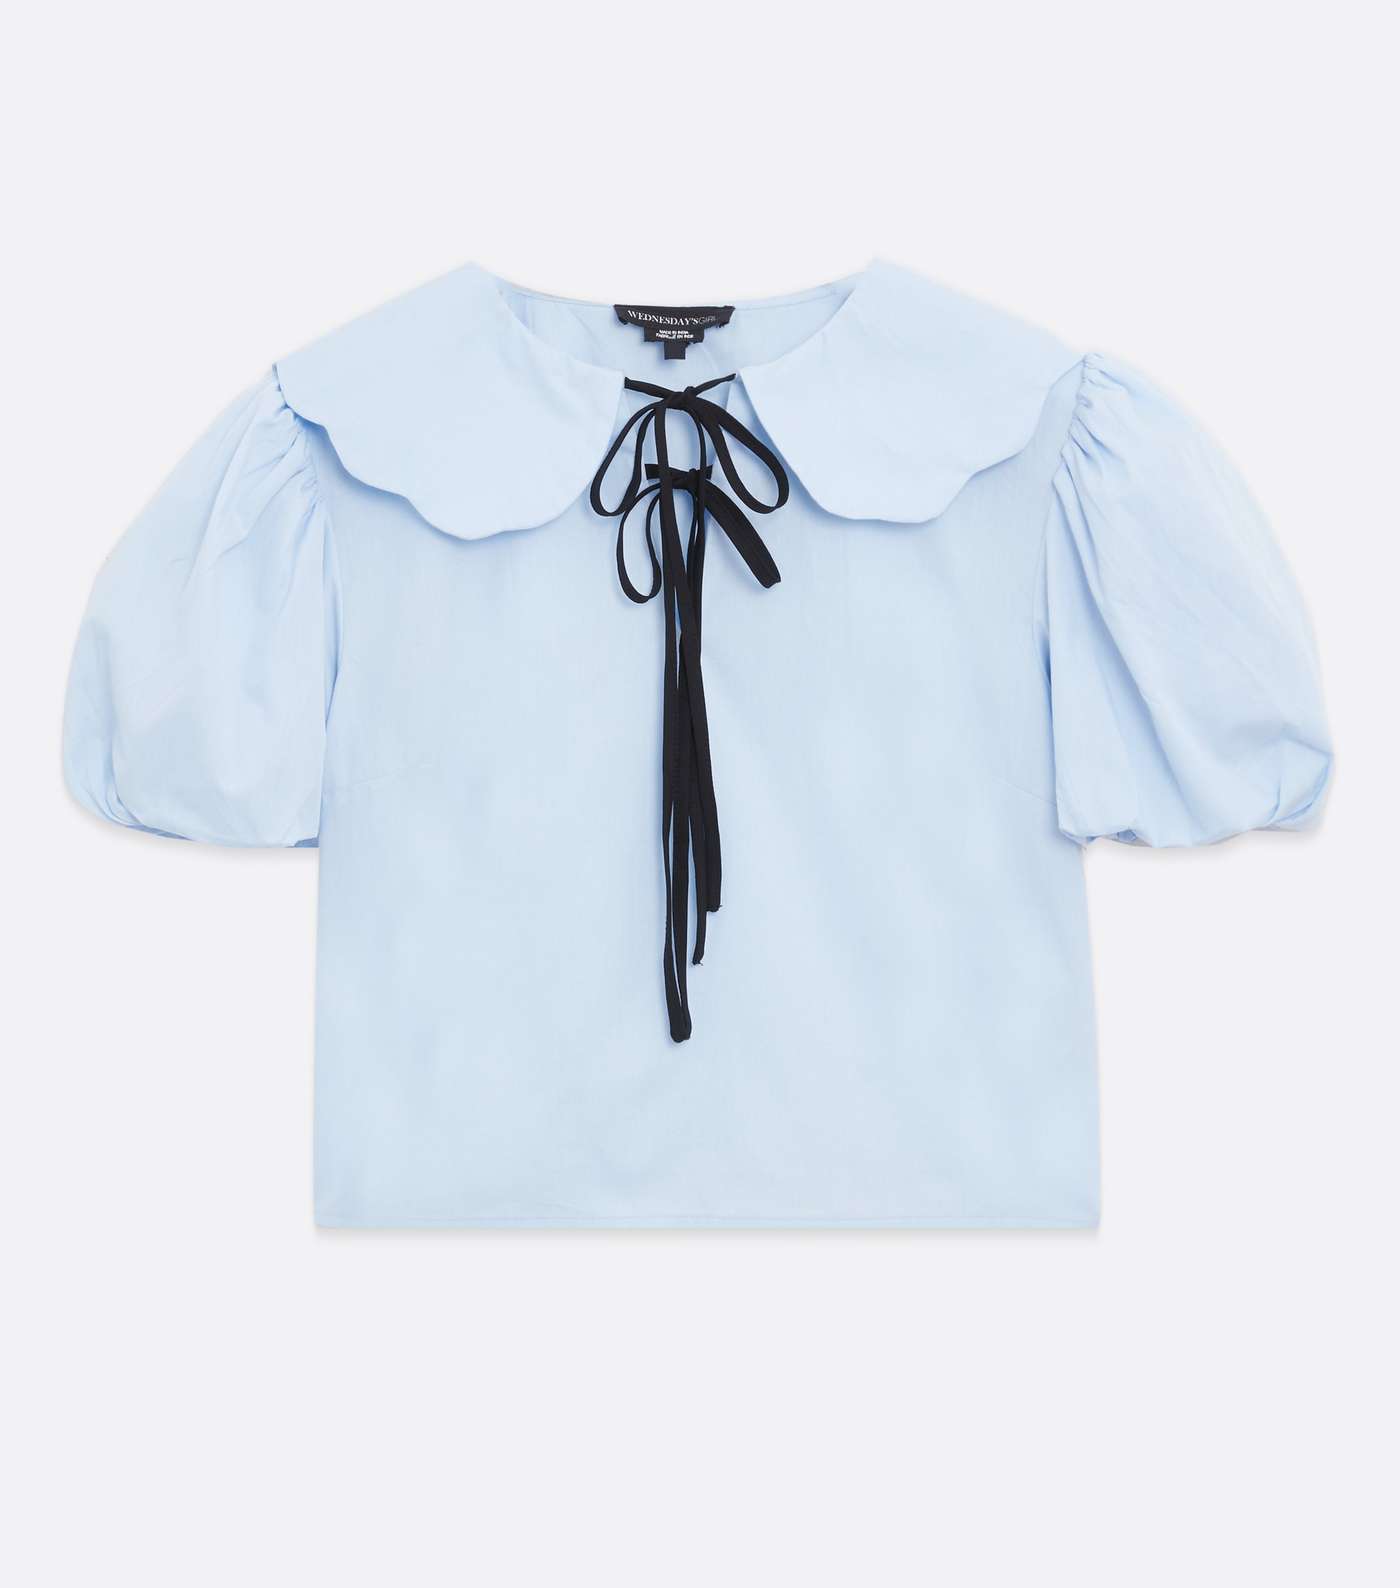 Wednesday's Girl Pale Blue Frill Collar Tie Blouse Image 5